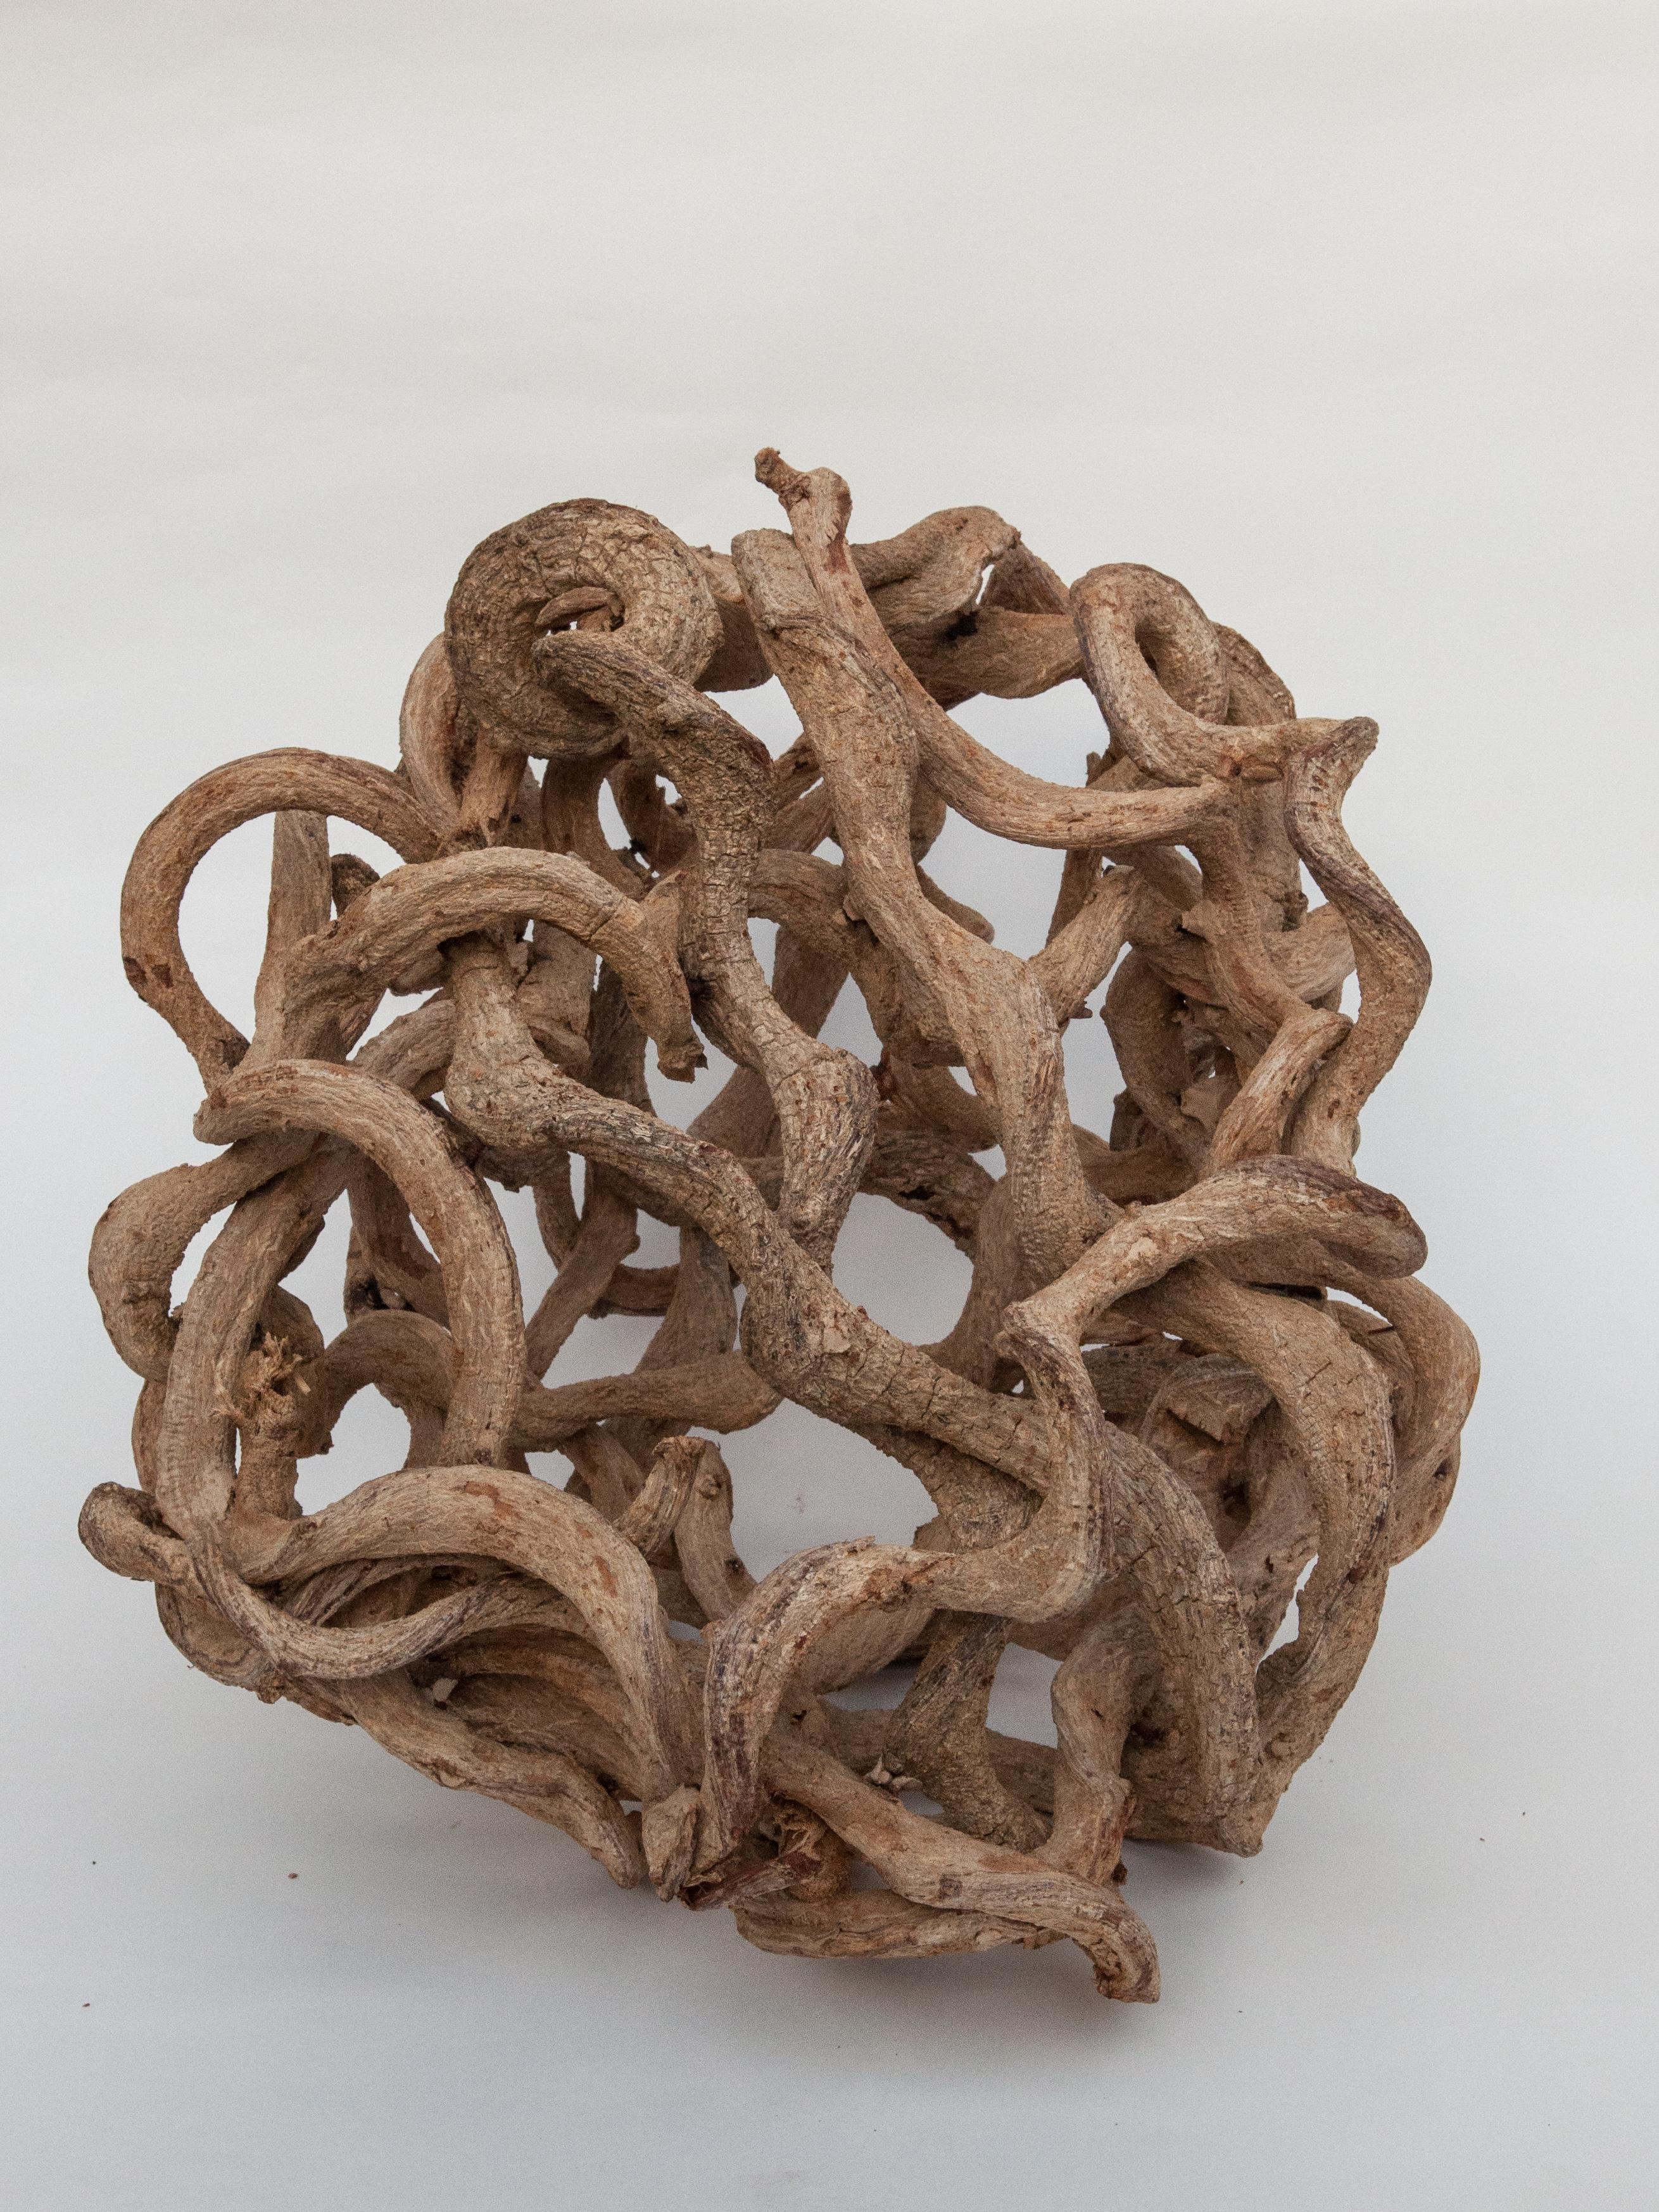 Rustic Liana Vine Organic Sculpture in Ovoid Shape, from Thailand